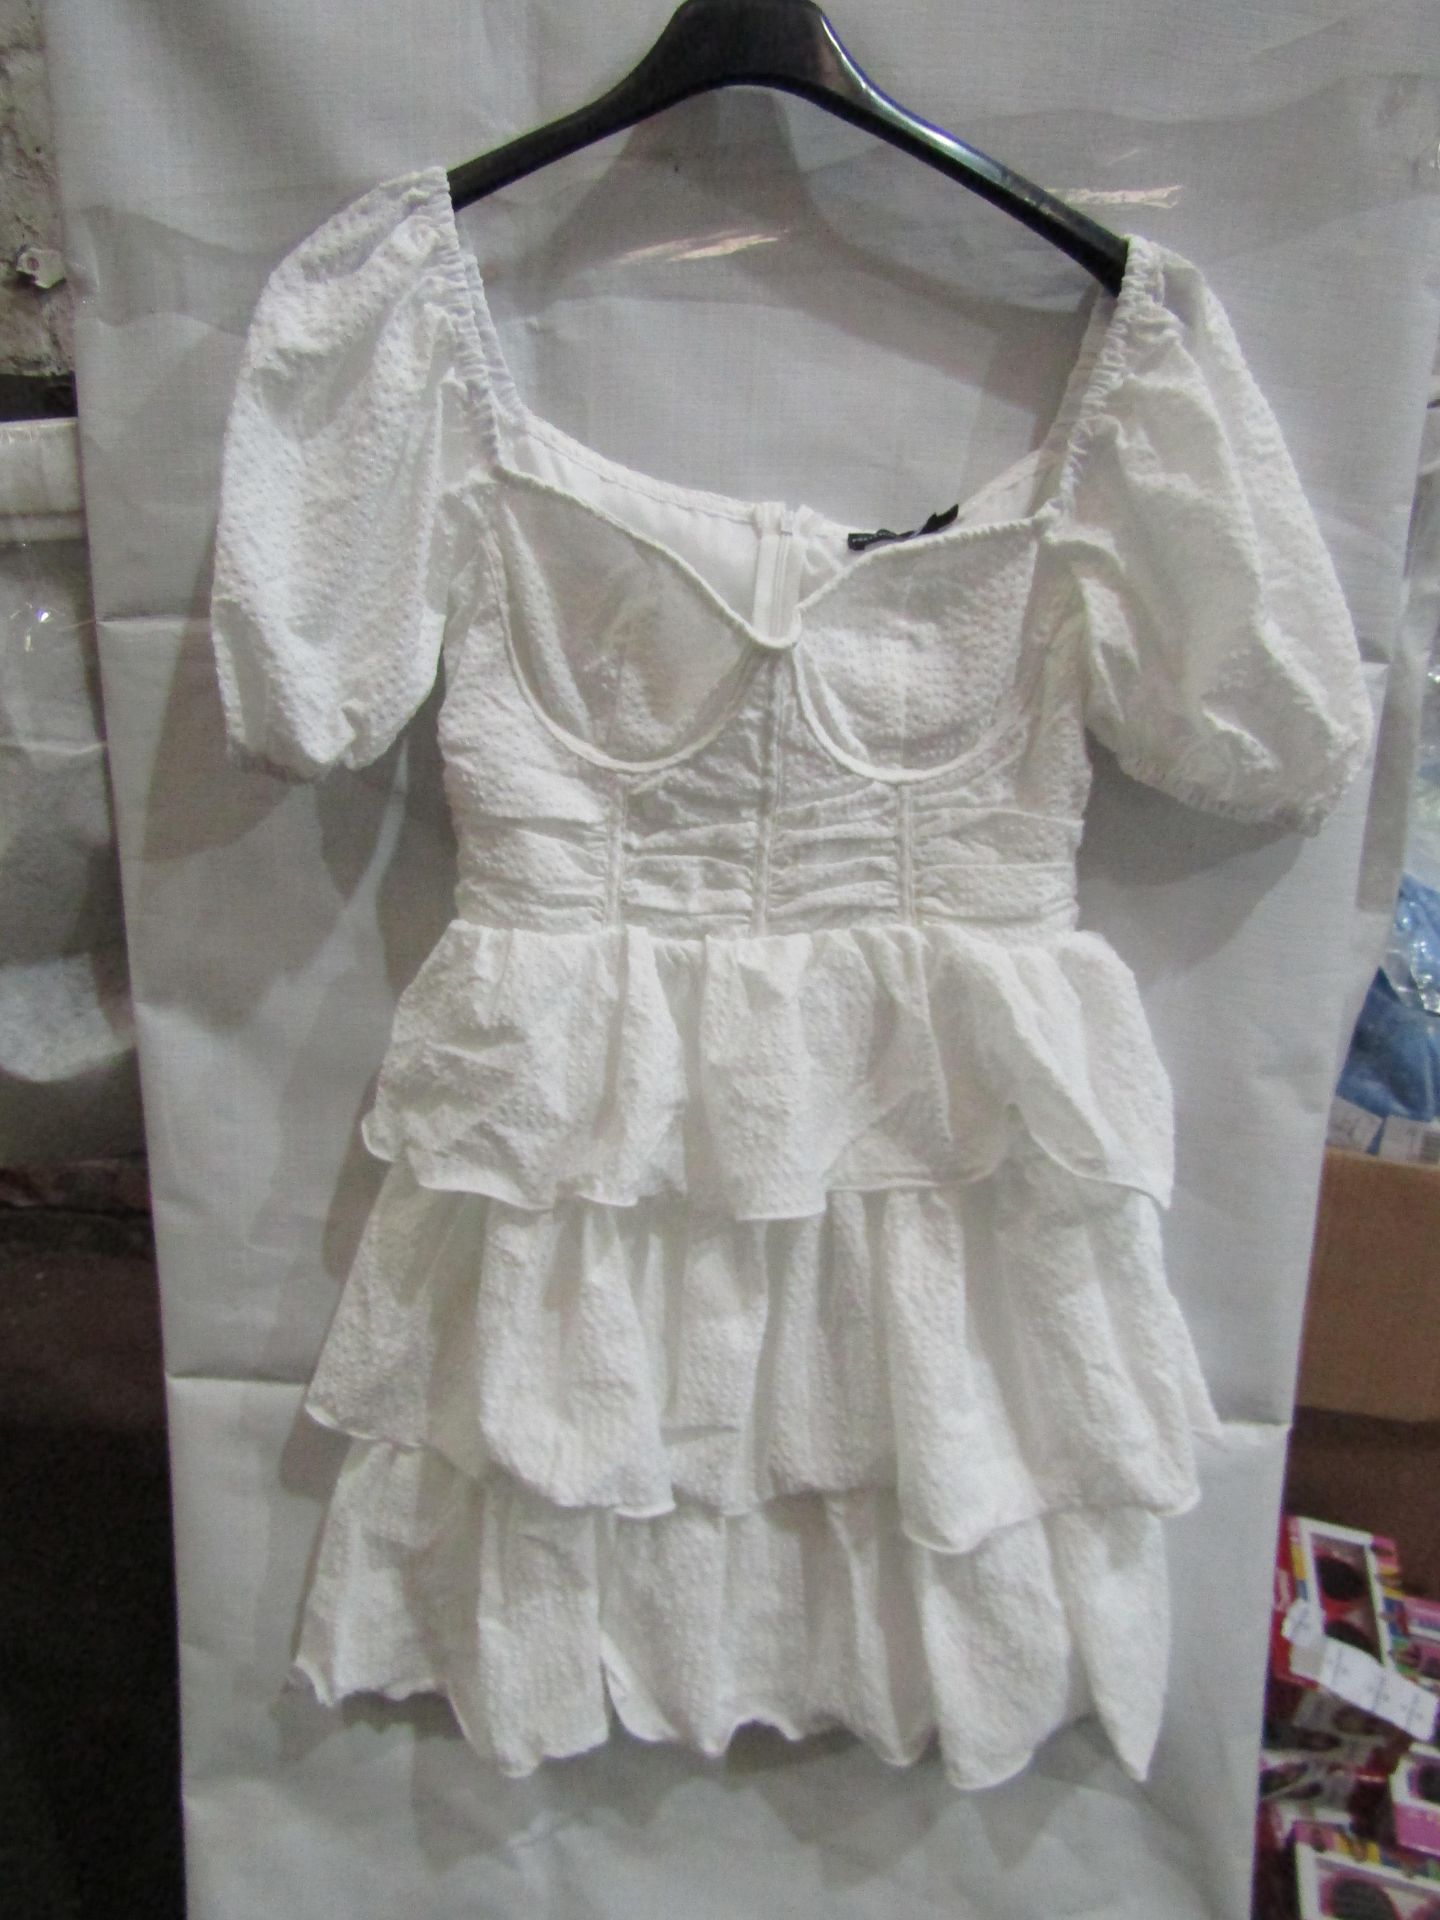 5x Pretty Little Thing White Crinkle Cup Detail Tiered Skirt Scatter Dress, Size 8, New & Packaged.